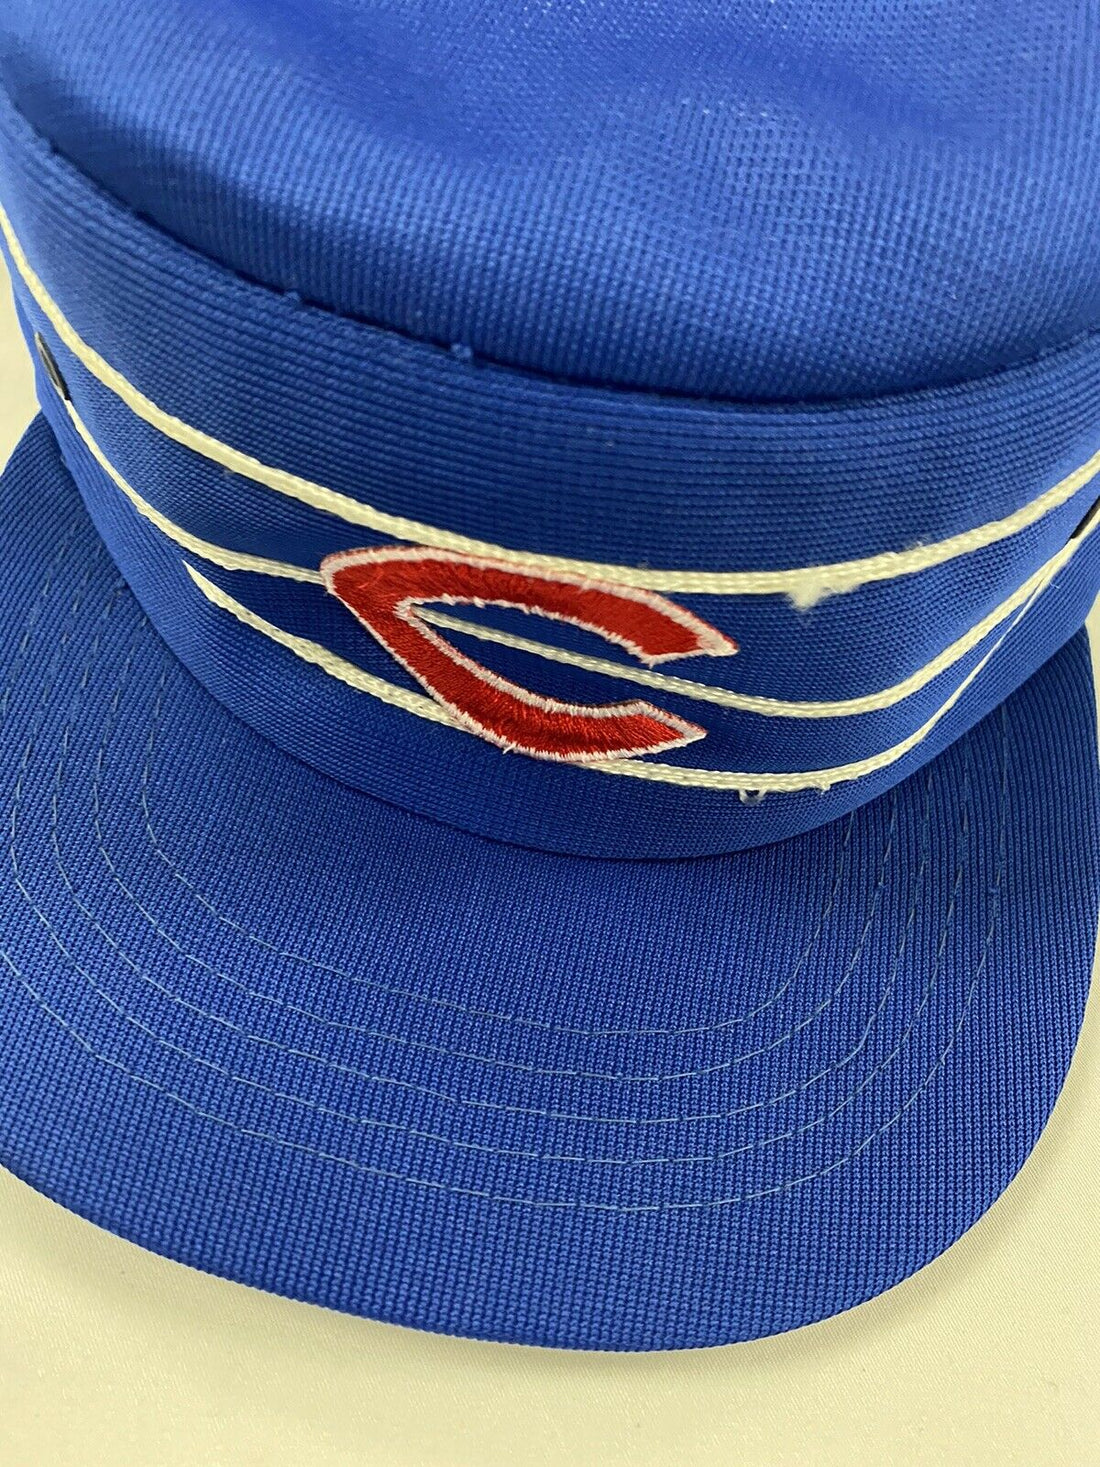 Vintage Chicago Cubs Pillbox Snapback Hat Cap OSFA 70s 80s MLB Young A –  Throwback Vault